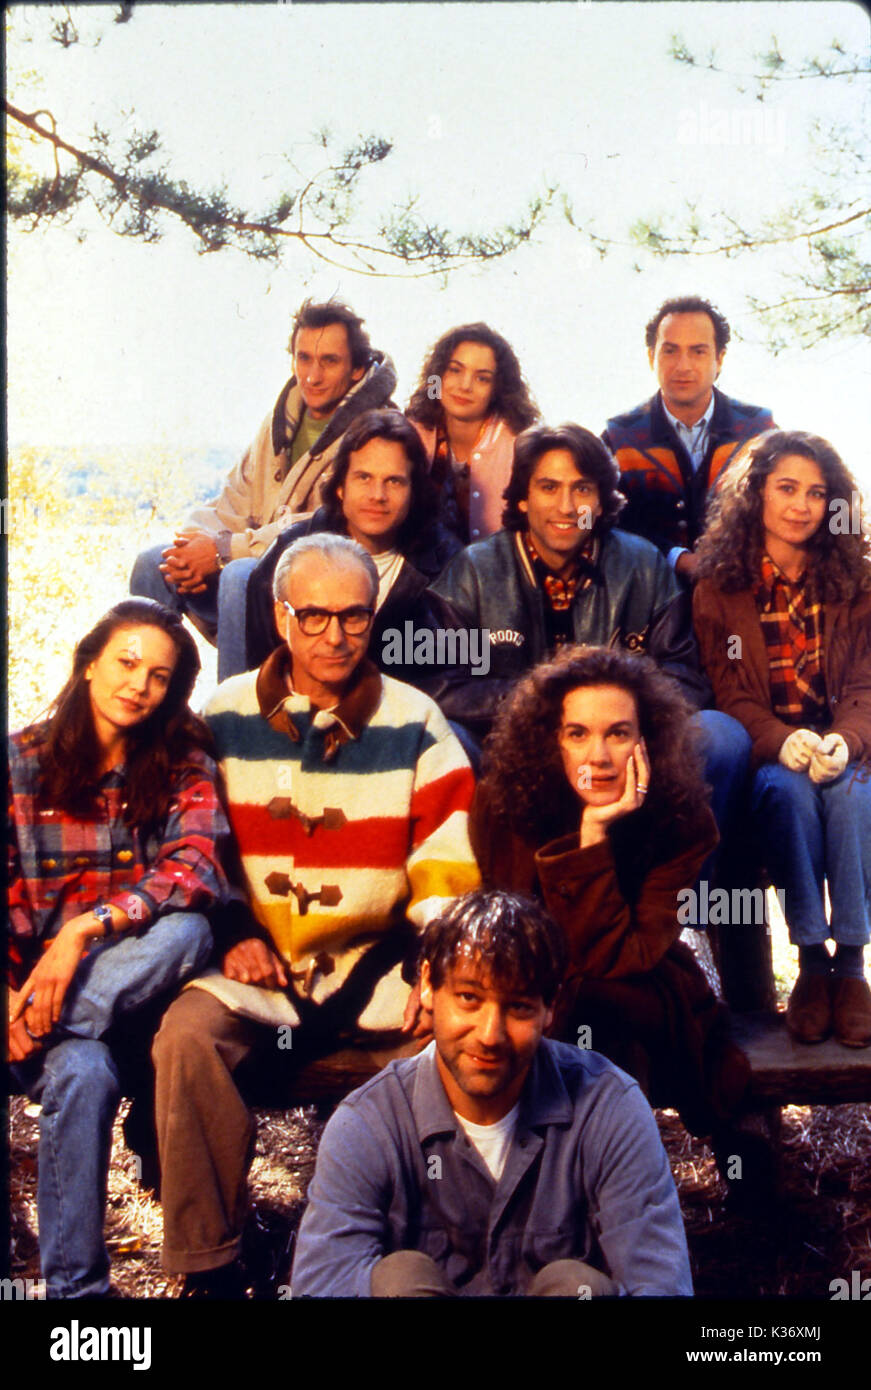 INDIAN SUMMER SAM RAIMI DIANE LANE, ALAN ARKIN AND ELIZABETH PERKINS BILL PAXTON, VINCENT SPANO AND JULIE WARNER MATT CRAVEN, KIMBERLY WILLIAMS AND KEVIN POLLAK A TOUCHSTONE PICTURE     Date: 1993 Stock Photo